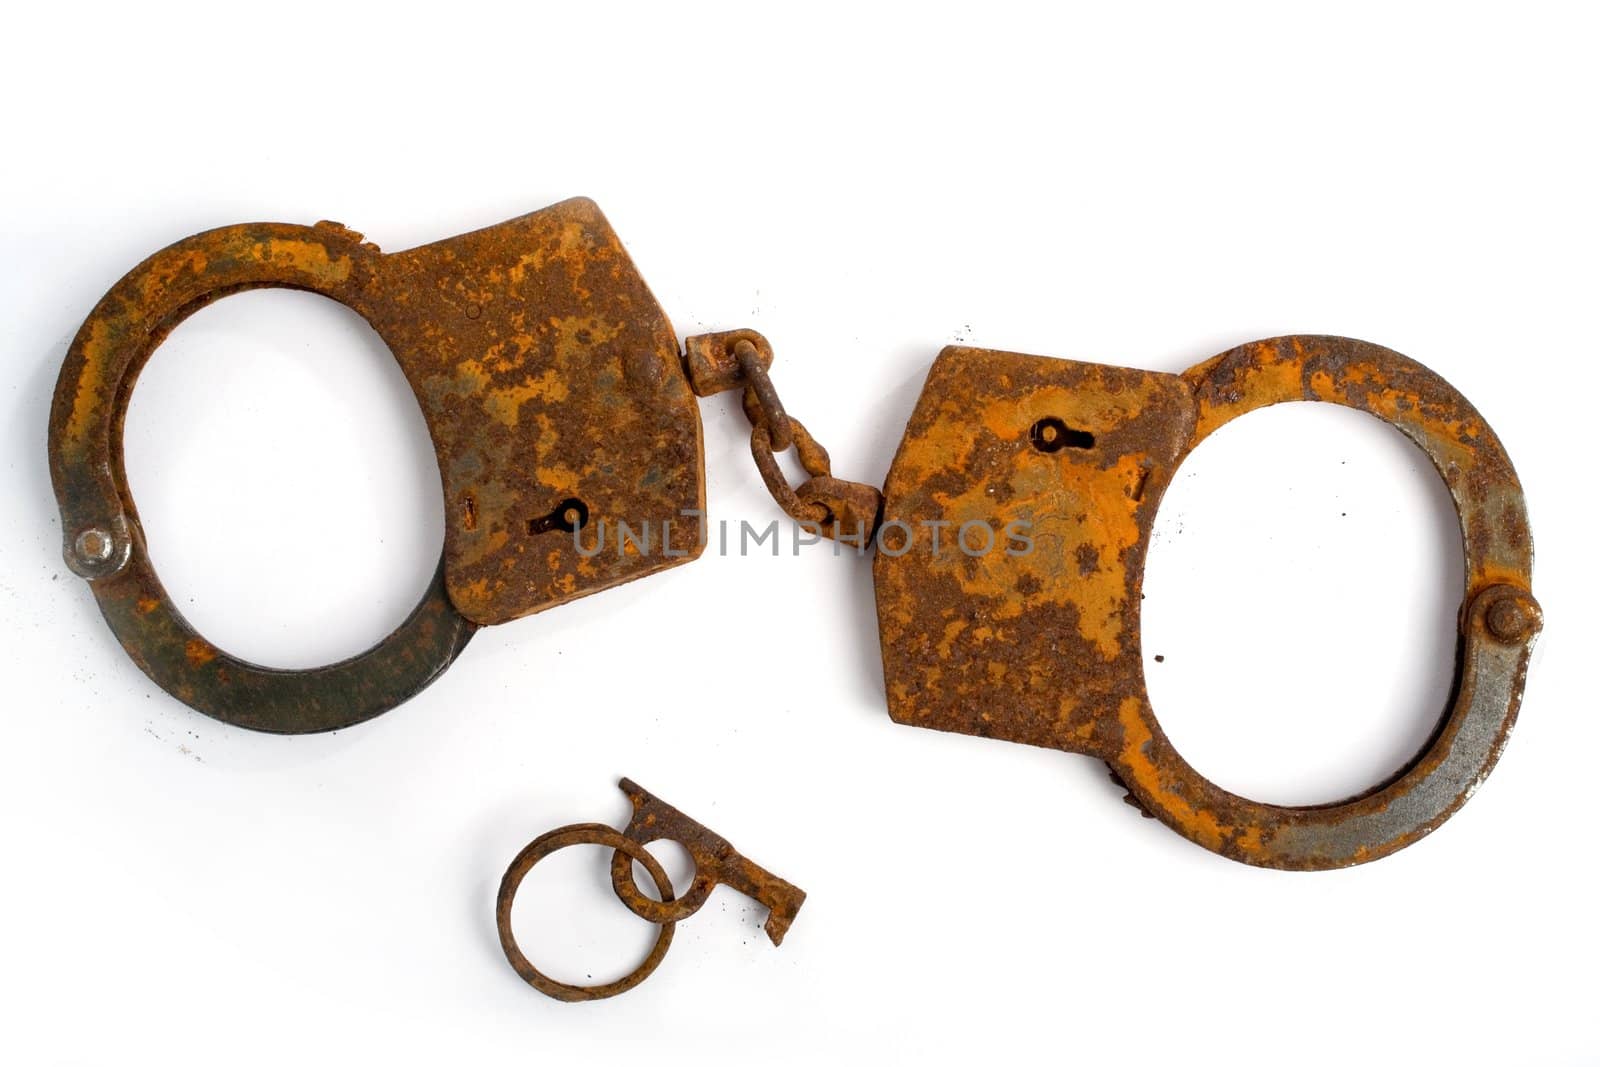 old rusty handcuffs on a white background